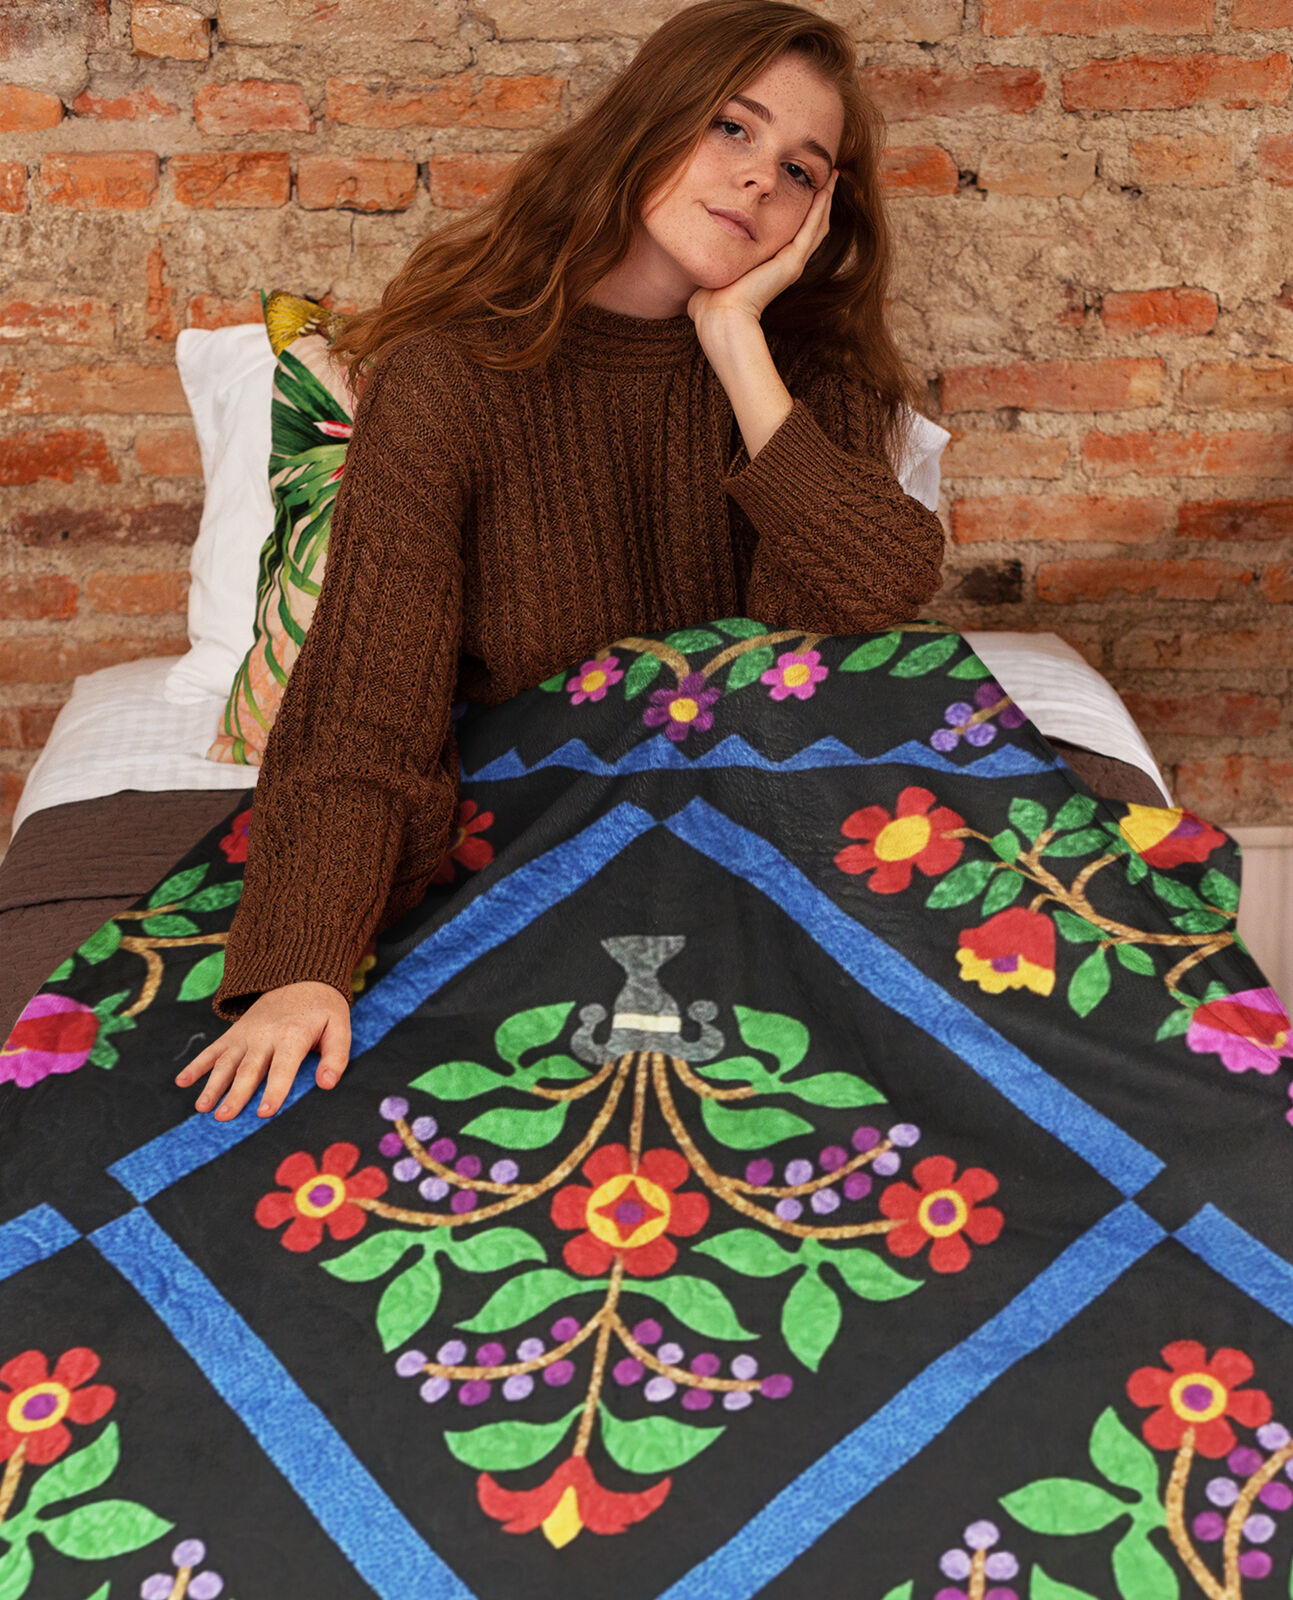 Hand Applique Floral Garden of Paradice FINISHED QUILT - The Best 